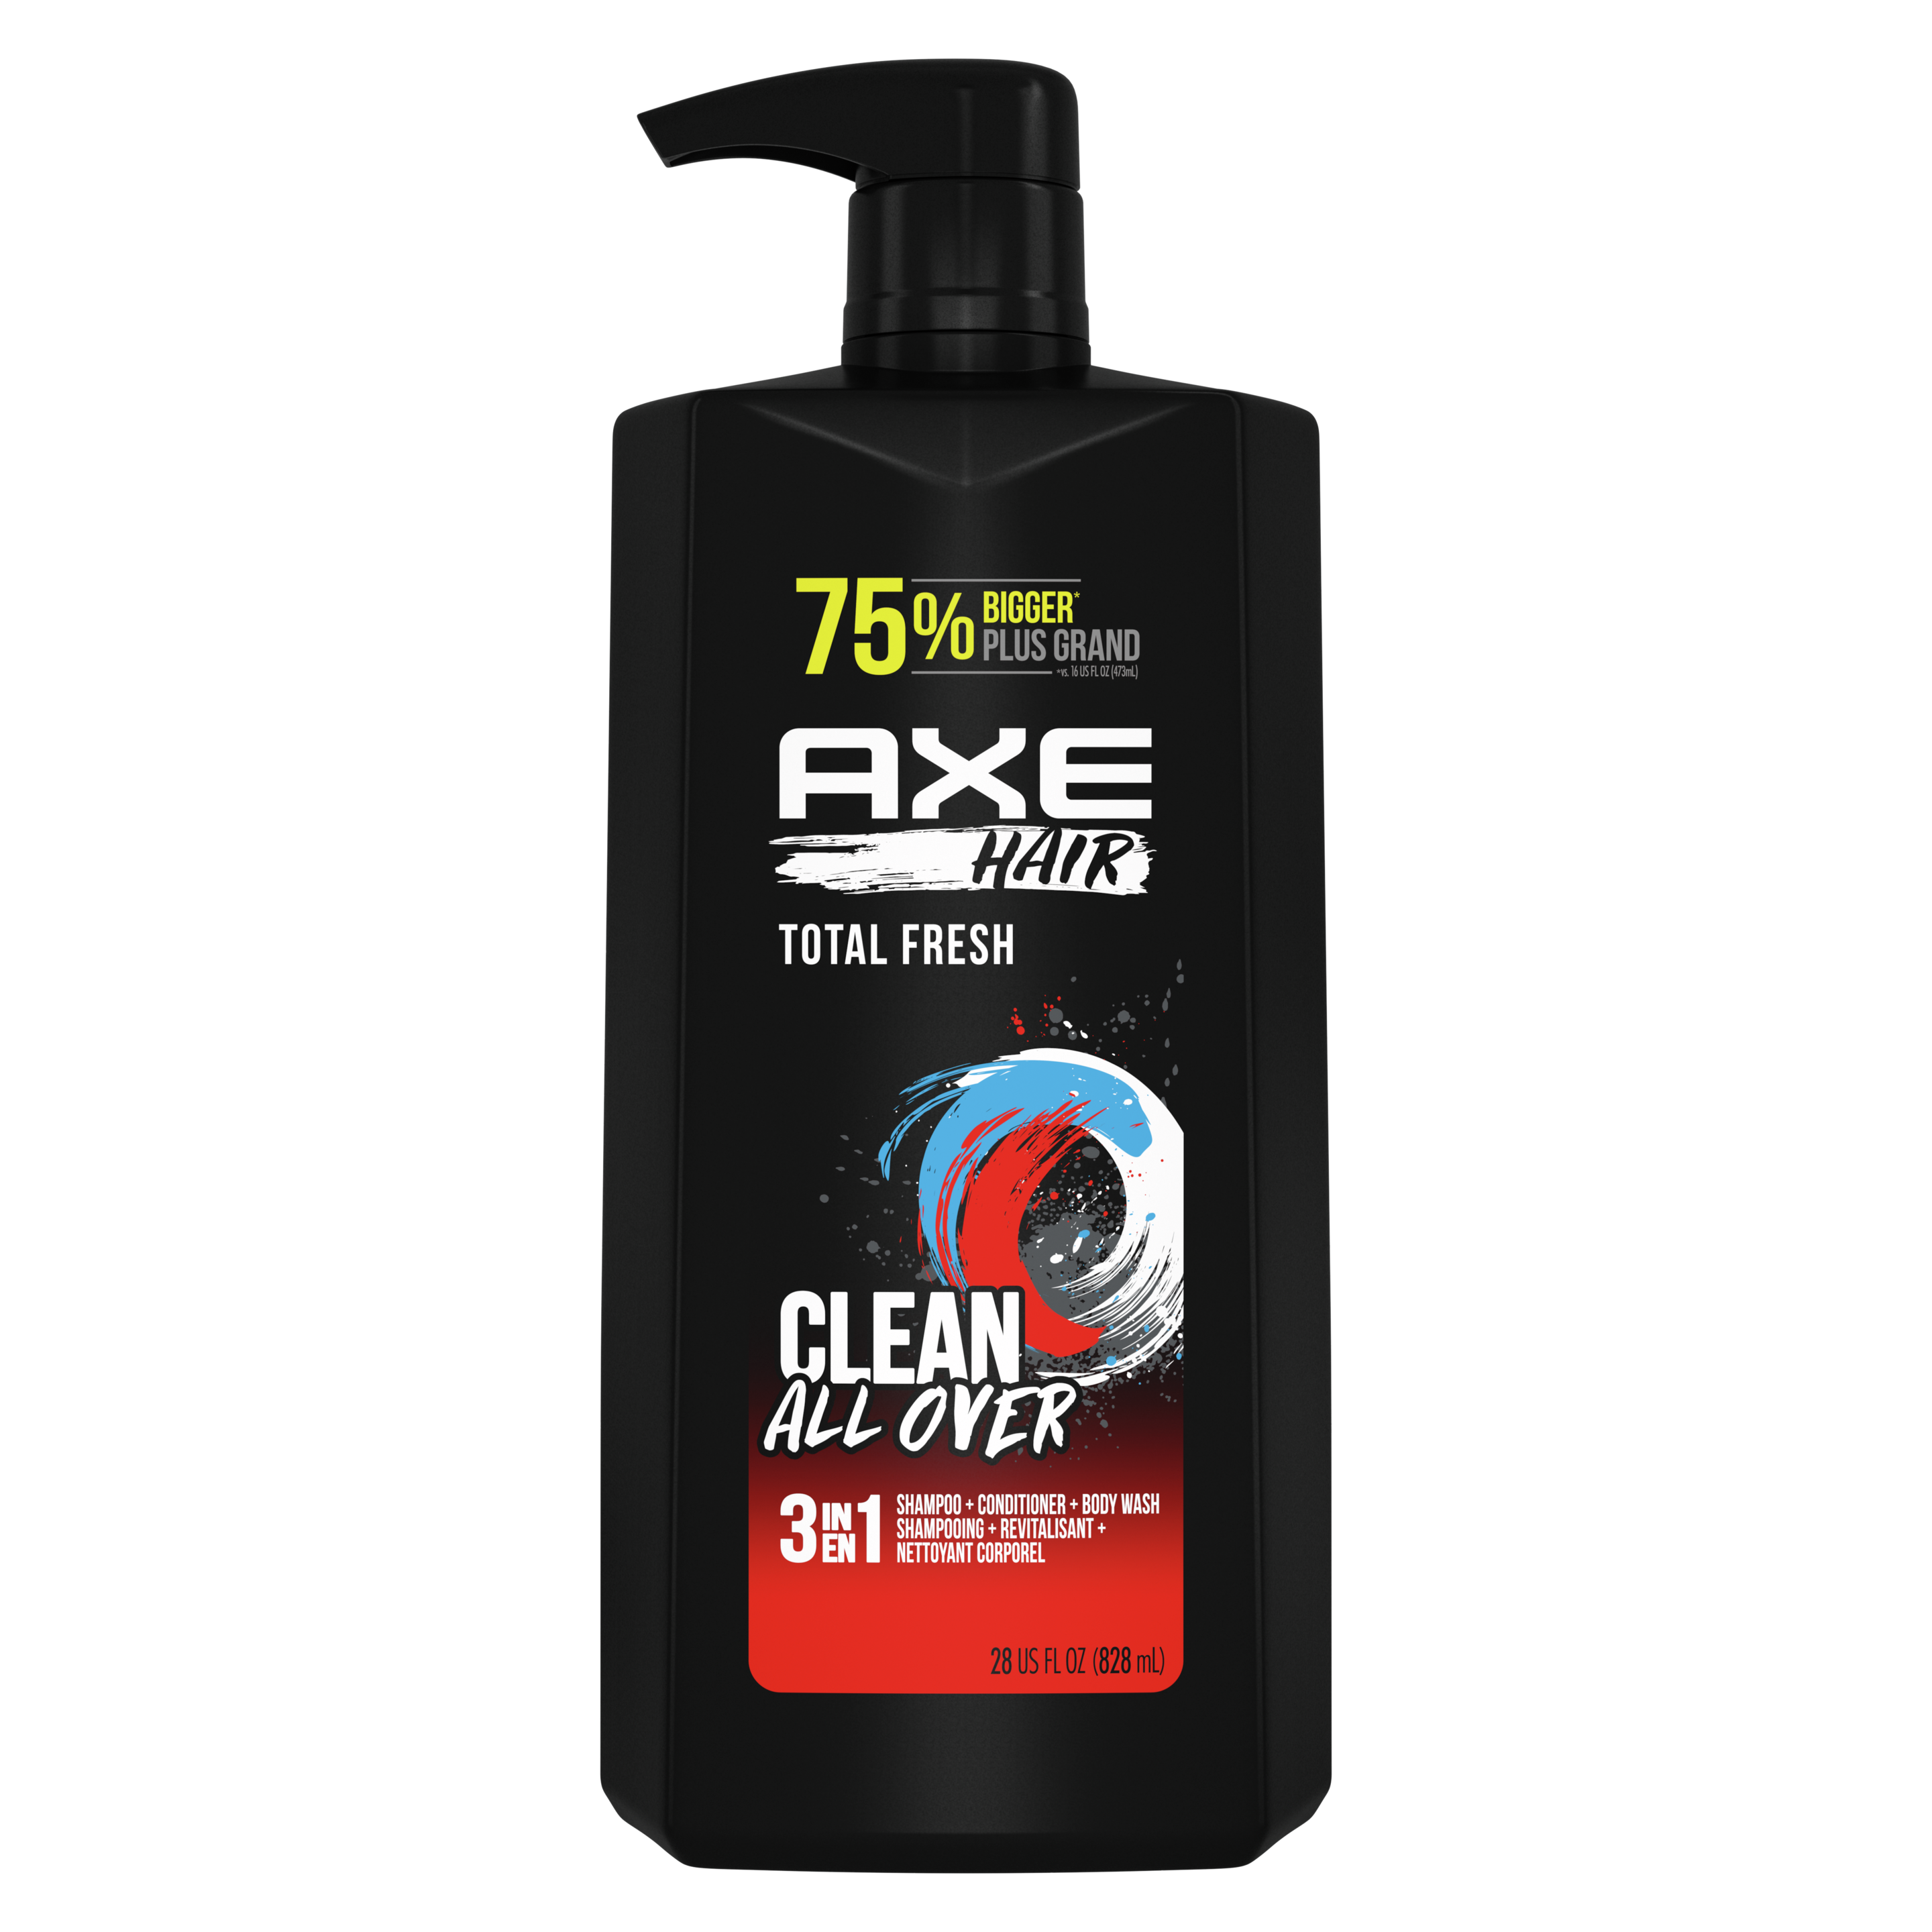 AXE Hair Total Fresh 3-in-1 Shampoo, Conditioner and Body Wash Pump